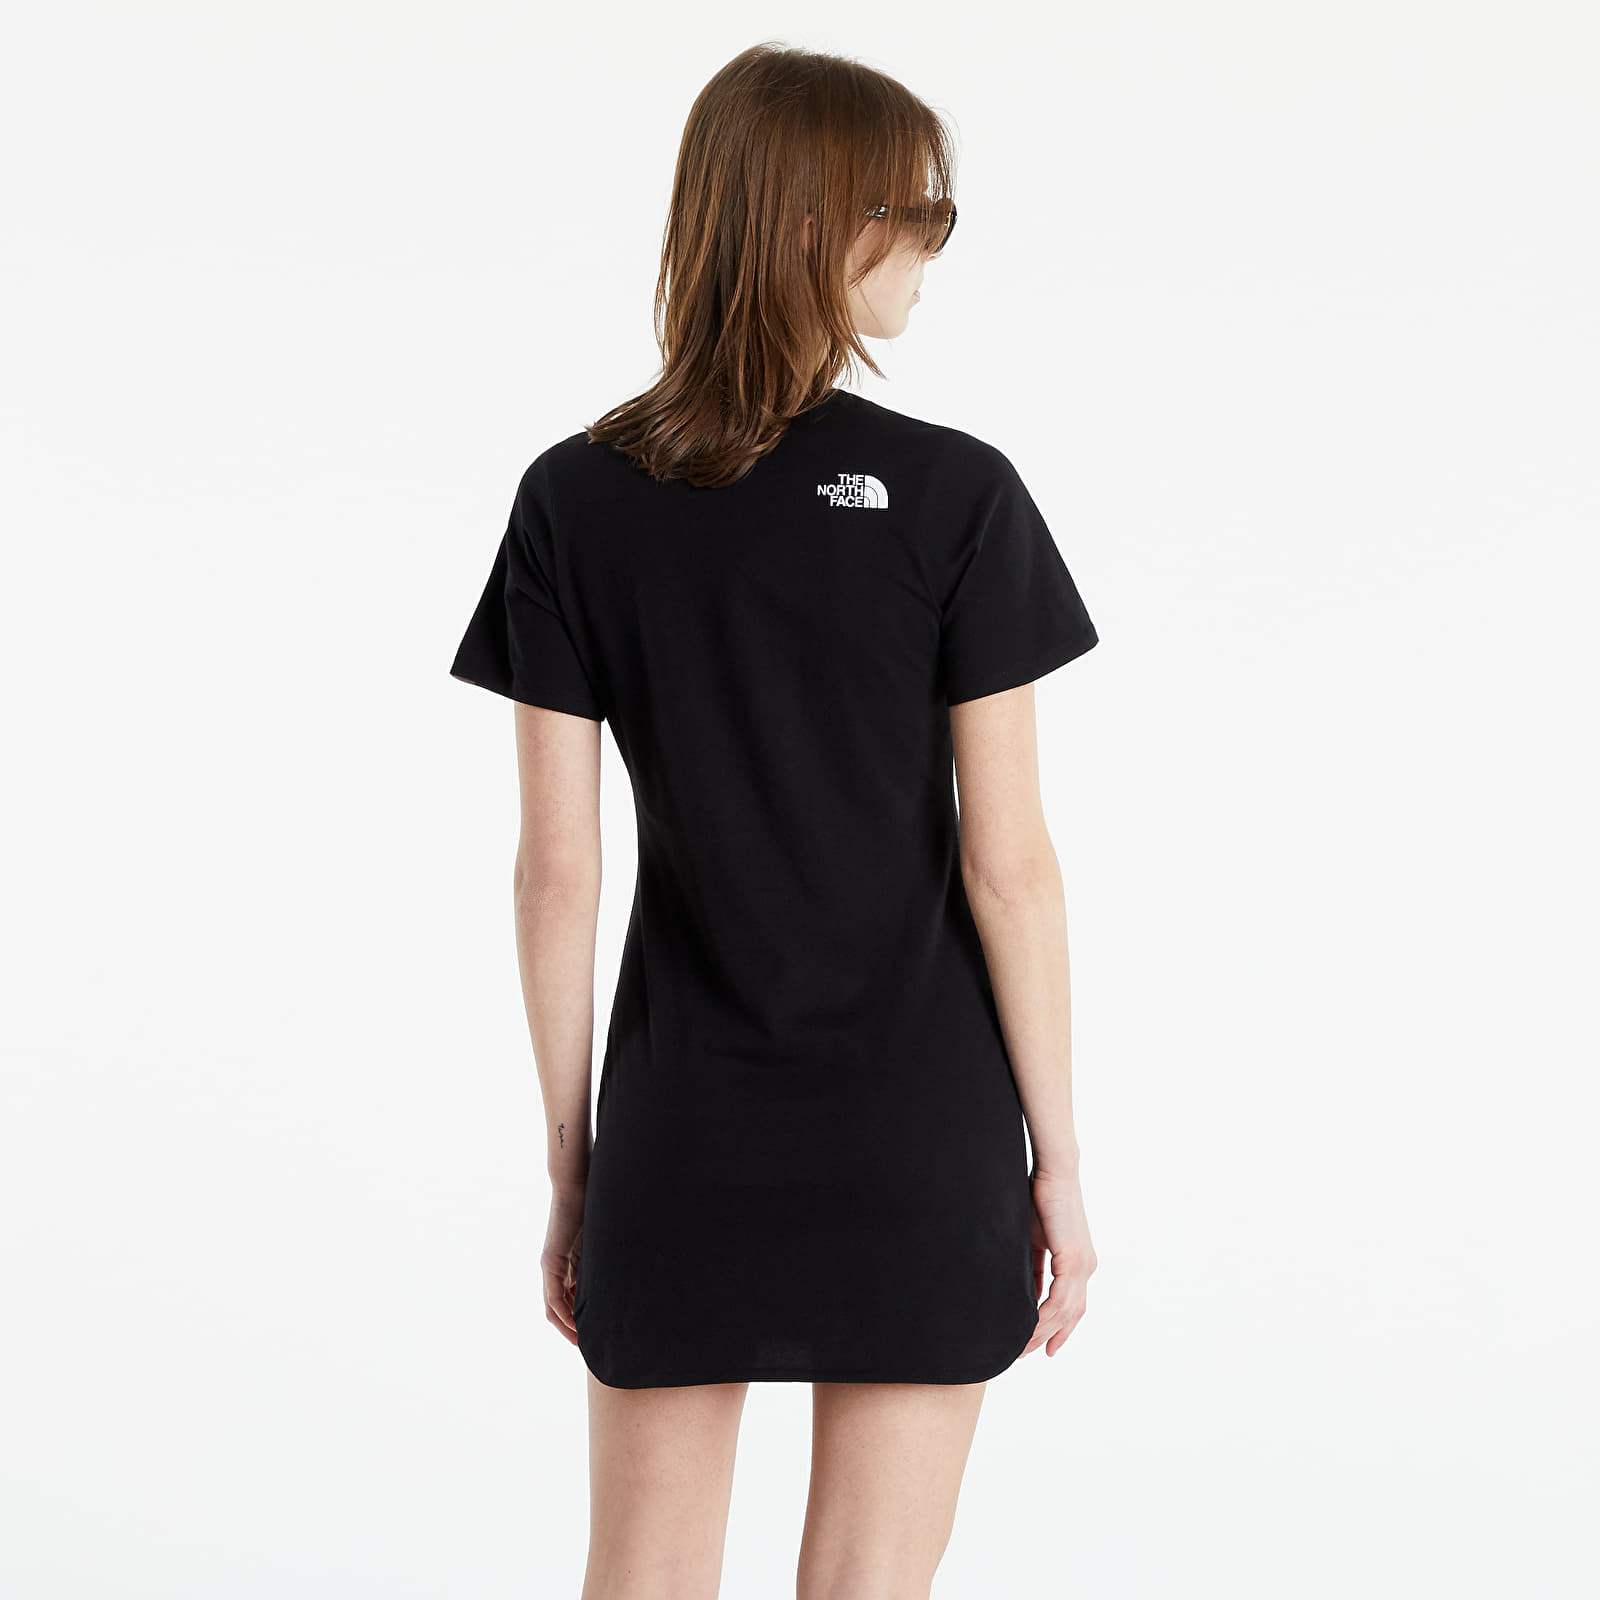 W Simple Tnf North Dress The | Dress Dome Face Footshop Black Update Tee